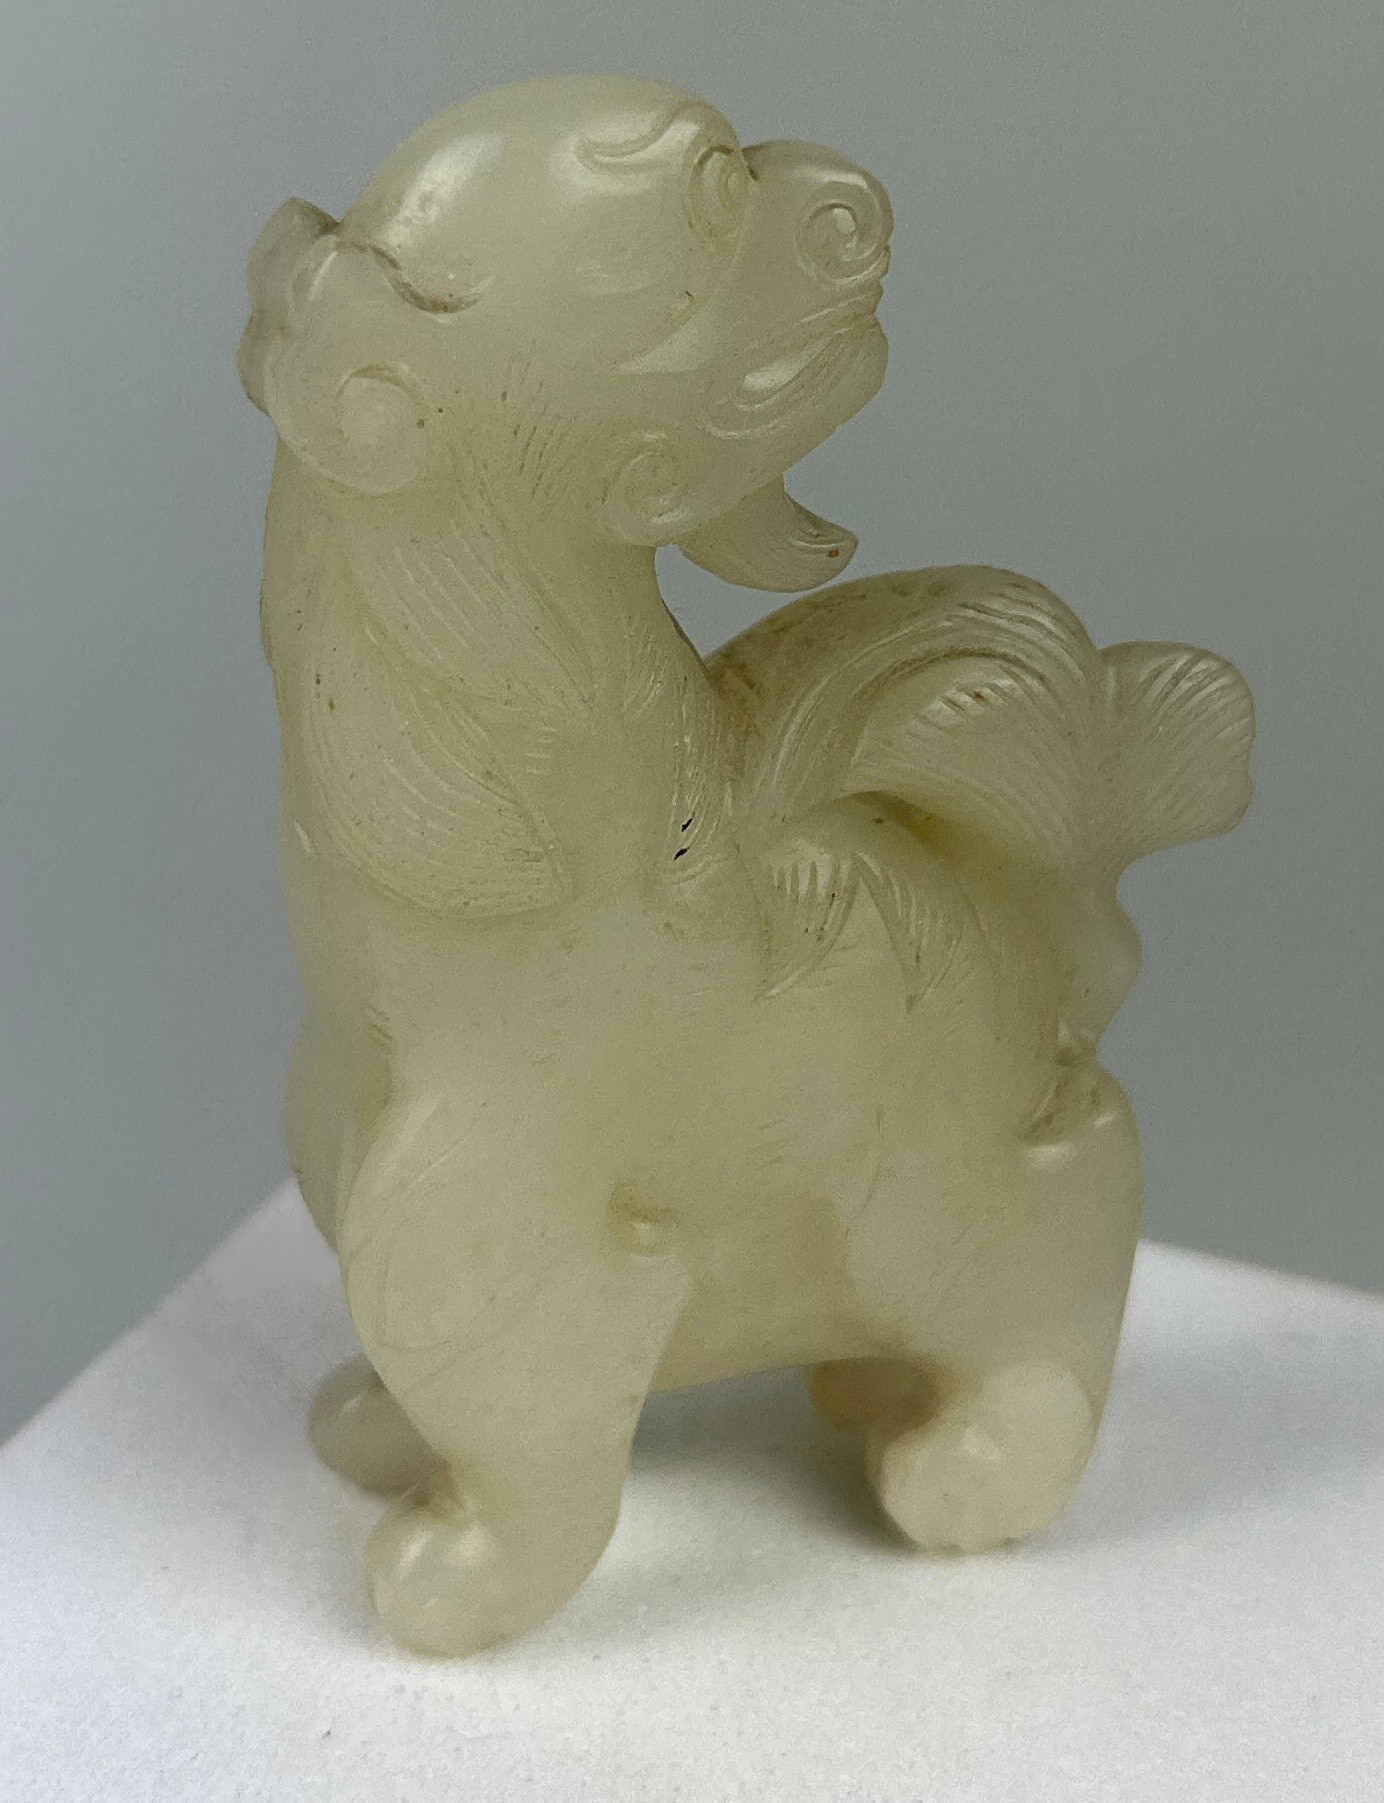 AN EARLY 19TH CENTURY CHINESE WHITE JADE GROUP OF A LION, 7.5cm x 4.7cm x 1.8cm - Image 2 of 4